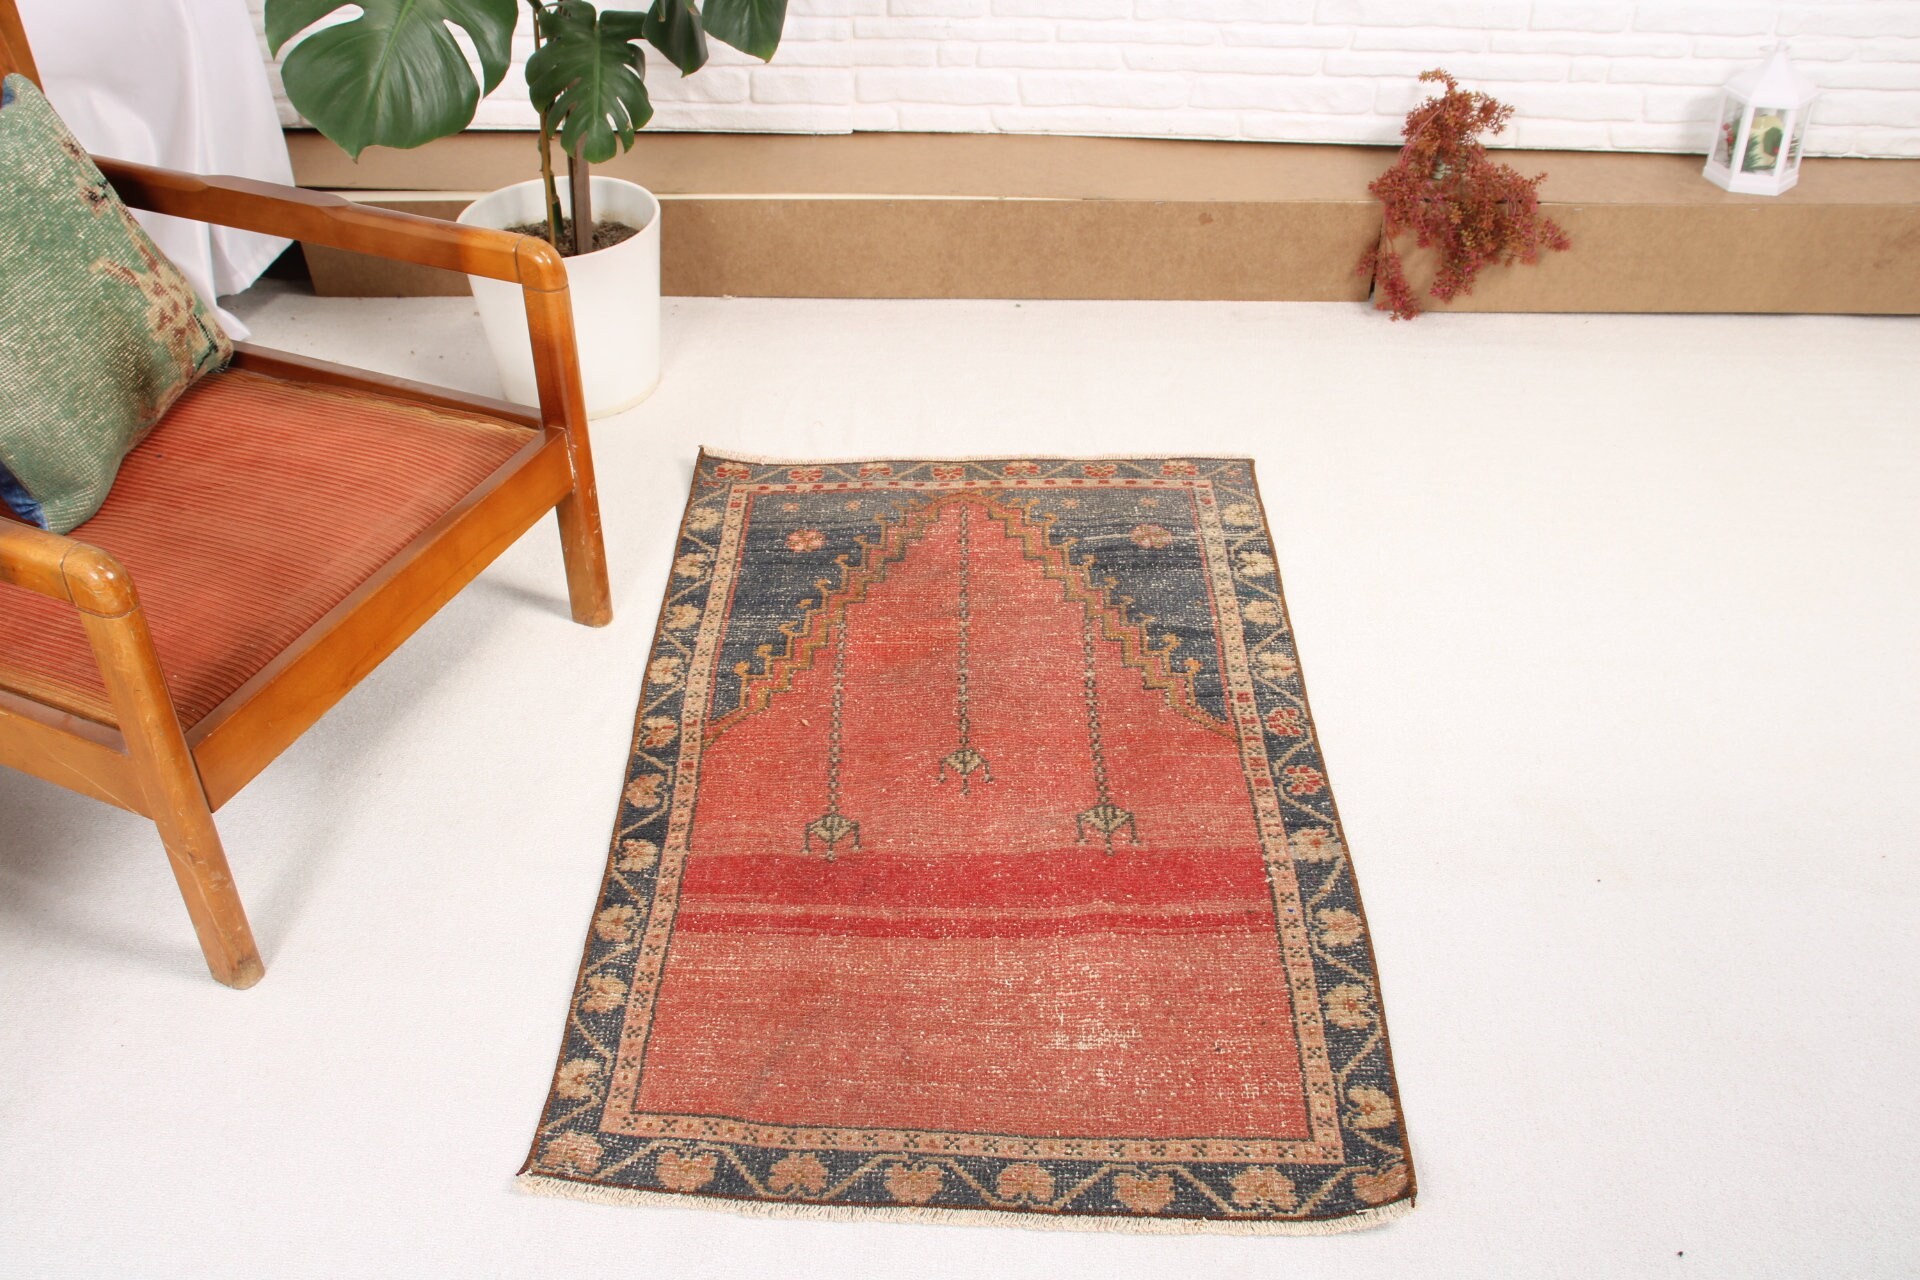 Anatolian Rugs, Turkish Rugs, Antique Rugs, Vintage Rug, Bright Rug, 2.5x3.9 ft Small Rug, Red Cool Rug, Door Mat Rugs, Wall Hanging Rugs